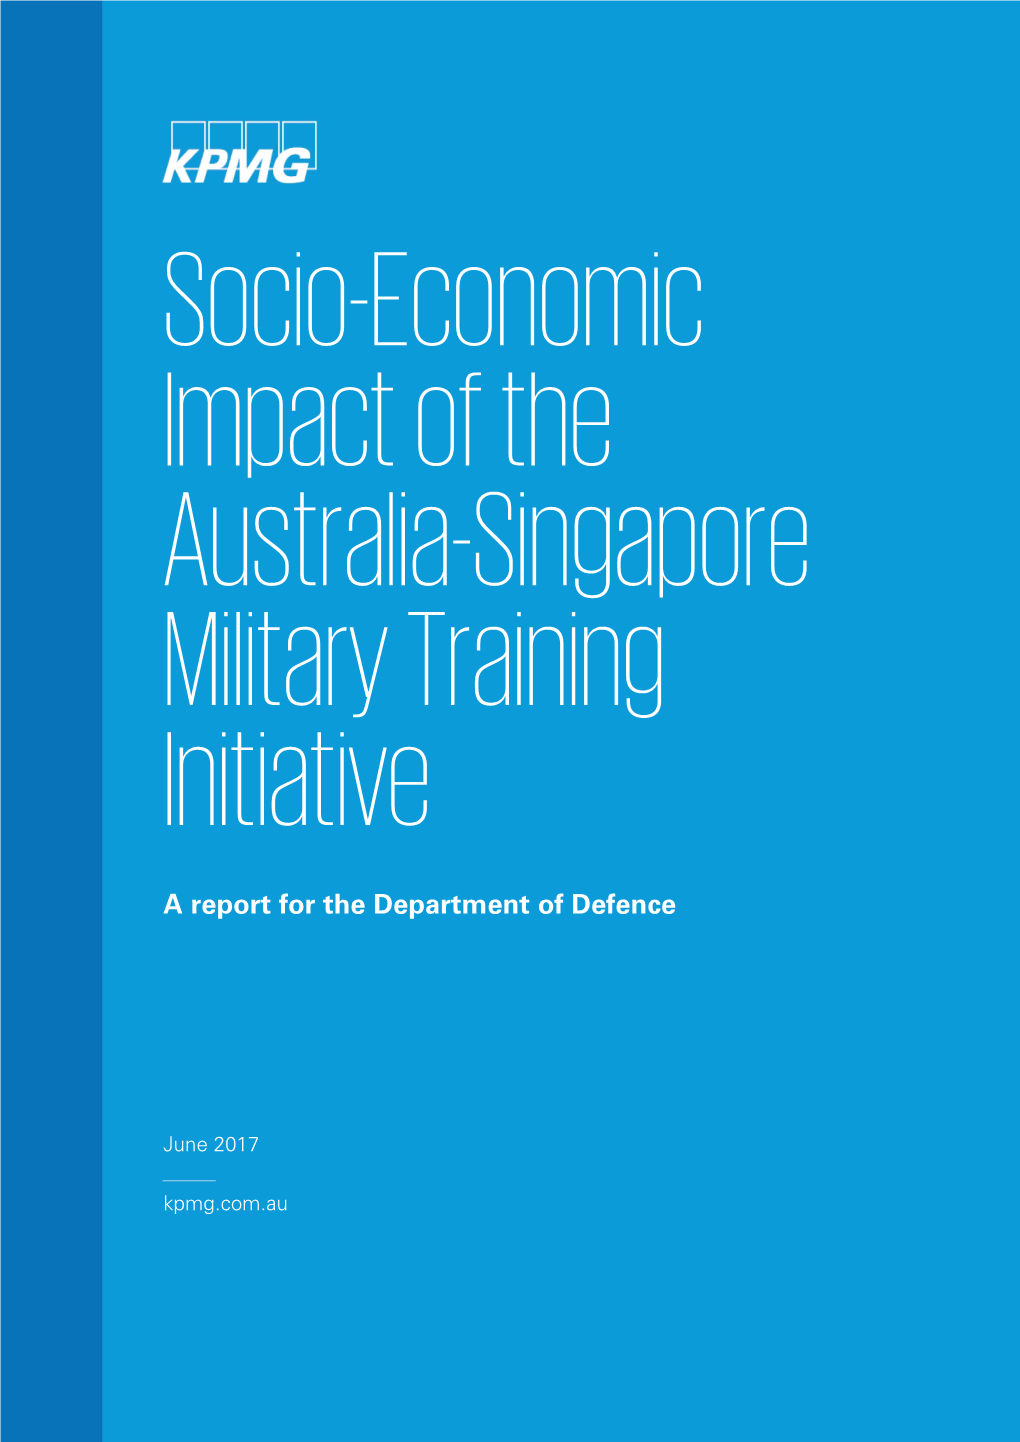 Socio-Economic Impact of the Australia Singapore Military Training Initiative a Report for the Department of Defence – June 2017 Disclaimer